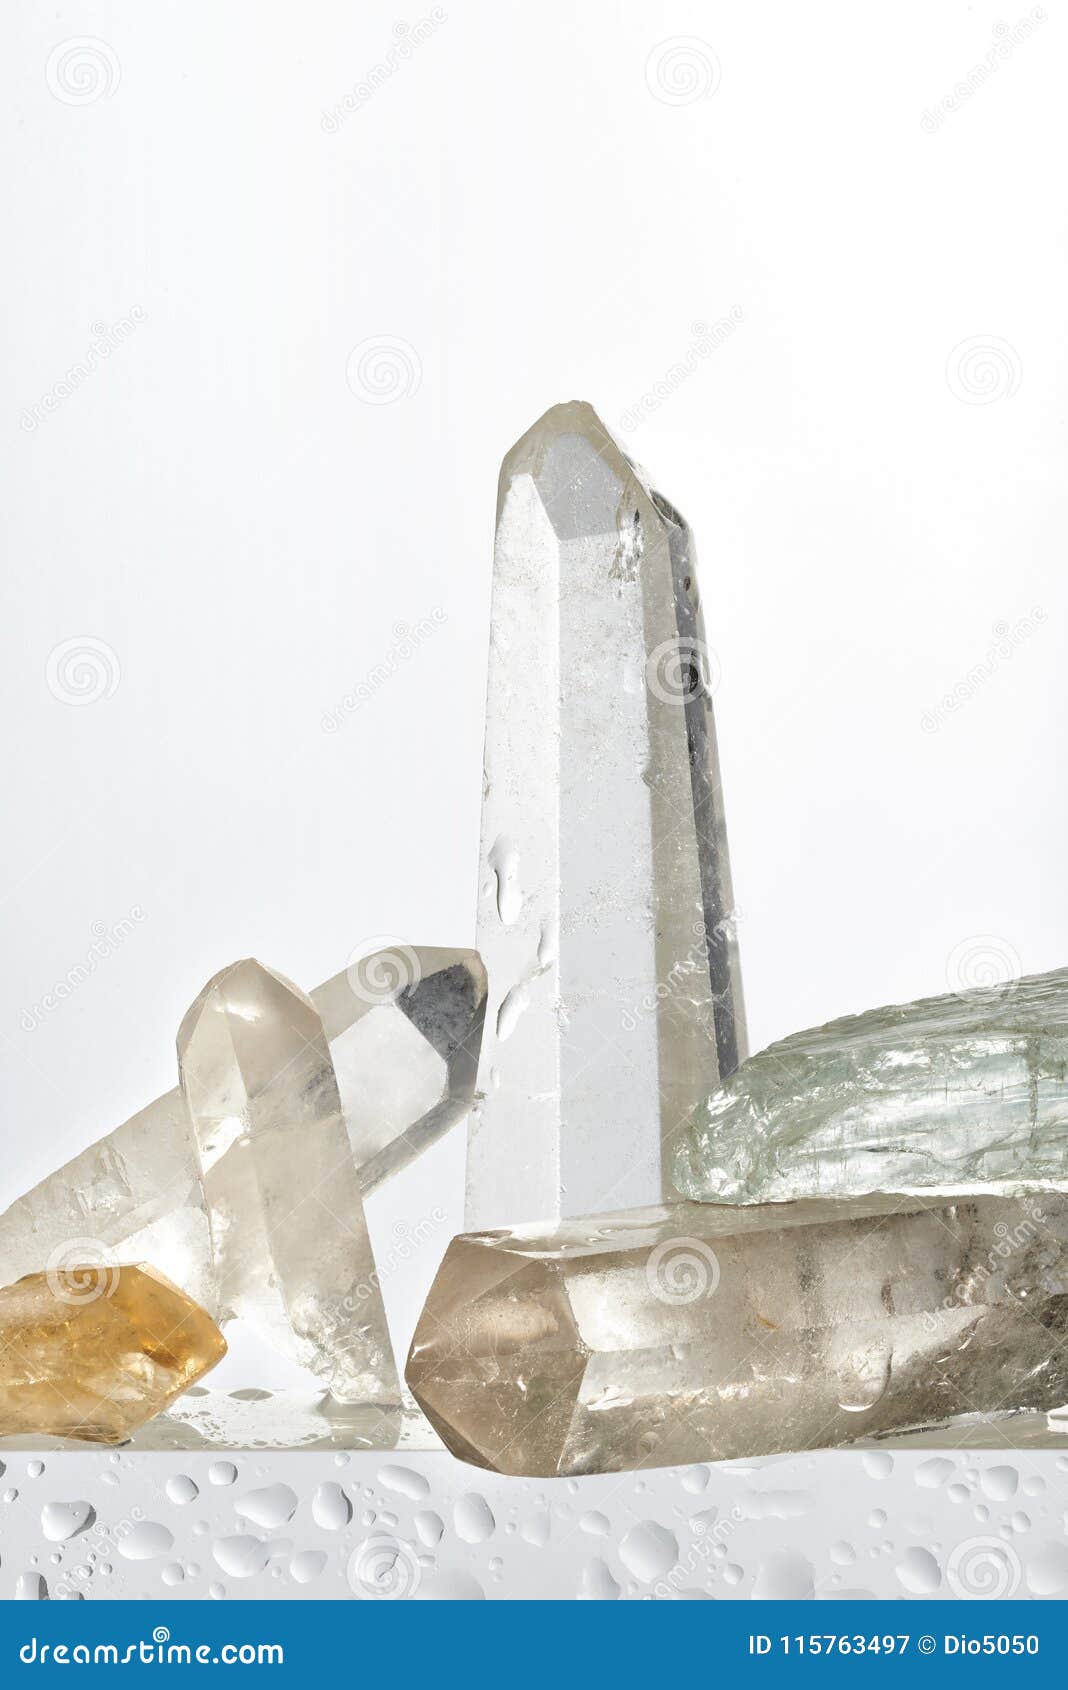 crystals on white background